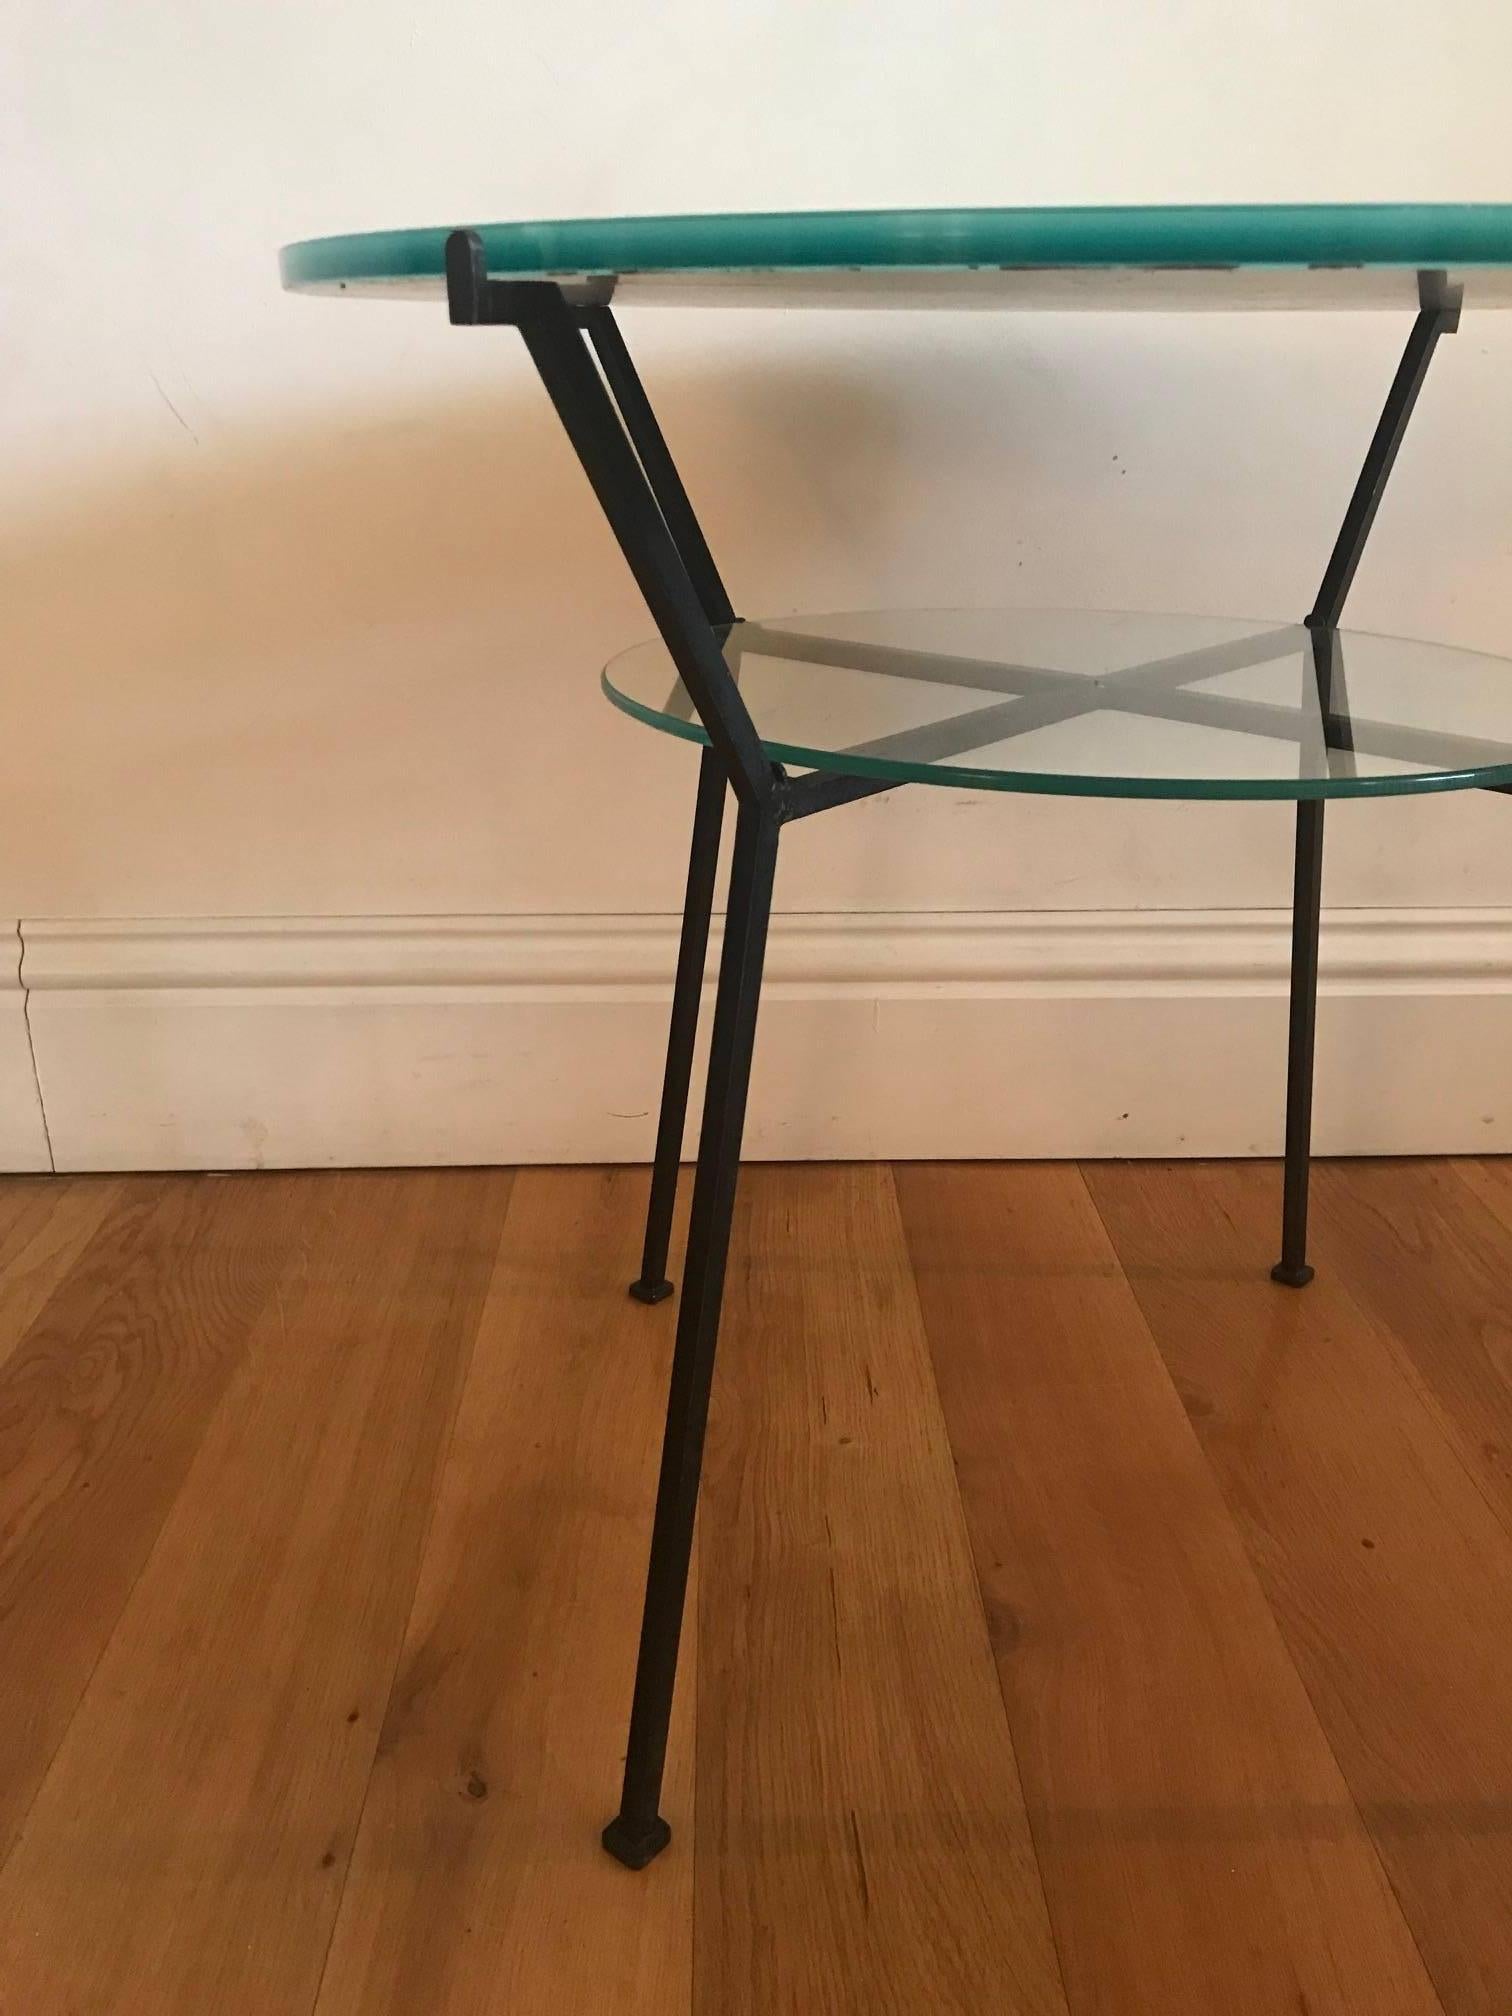 A painted iron and clear glass and frosted glass (both replaced) side table by the French, 20th century designer Charles Ramos.